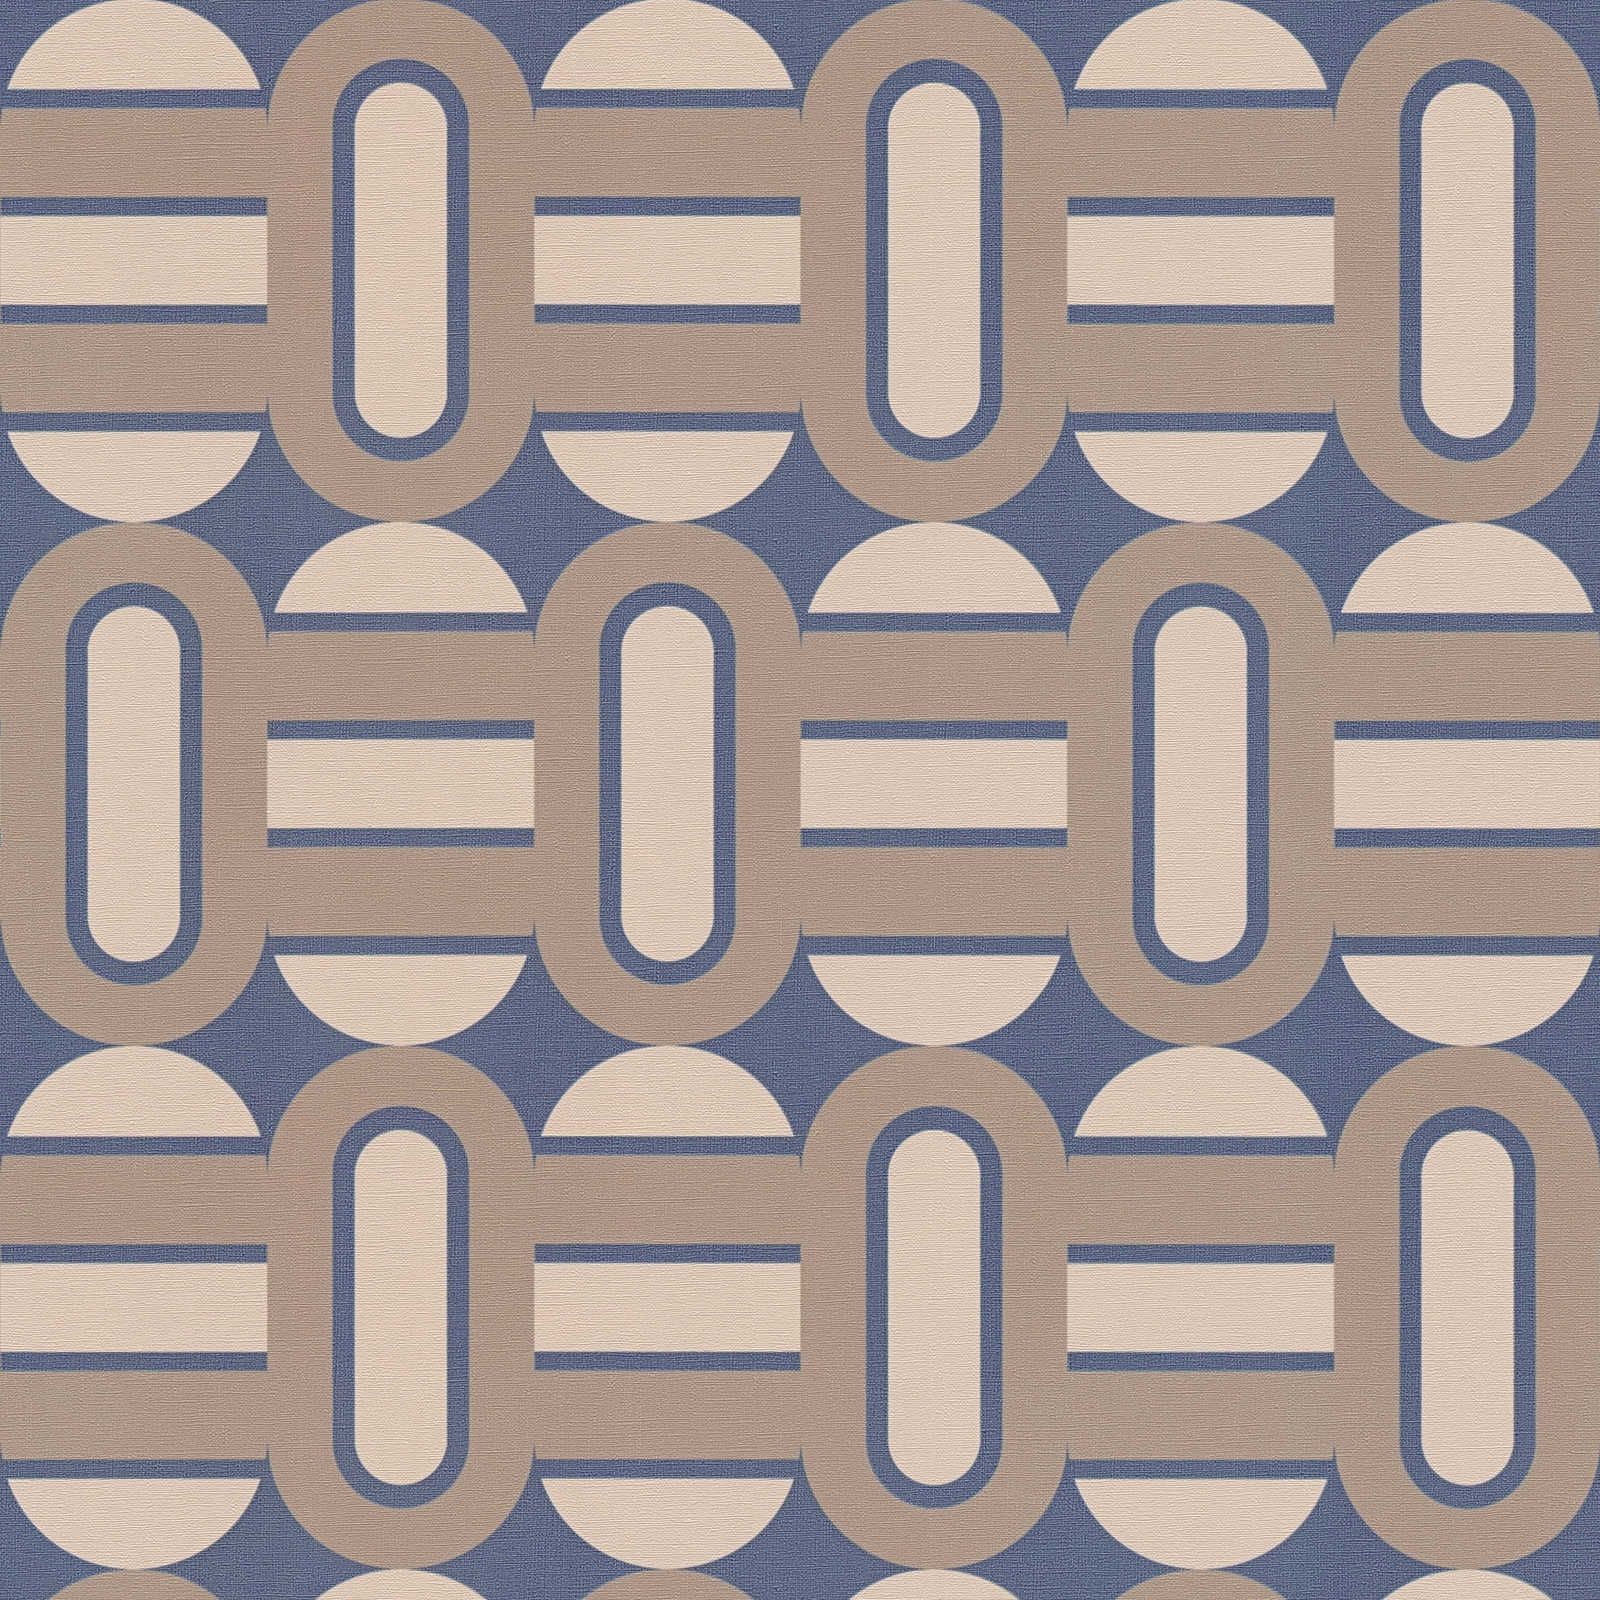         Retro style wallpaper decorated with ovals and bars - blue, brown, beige
    